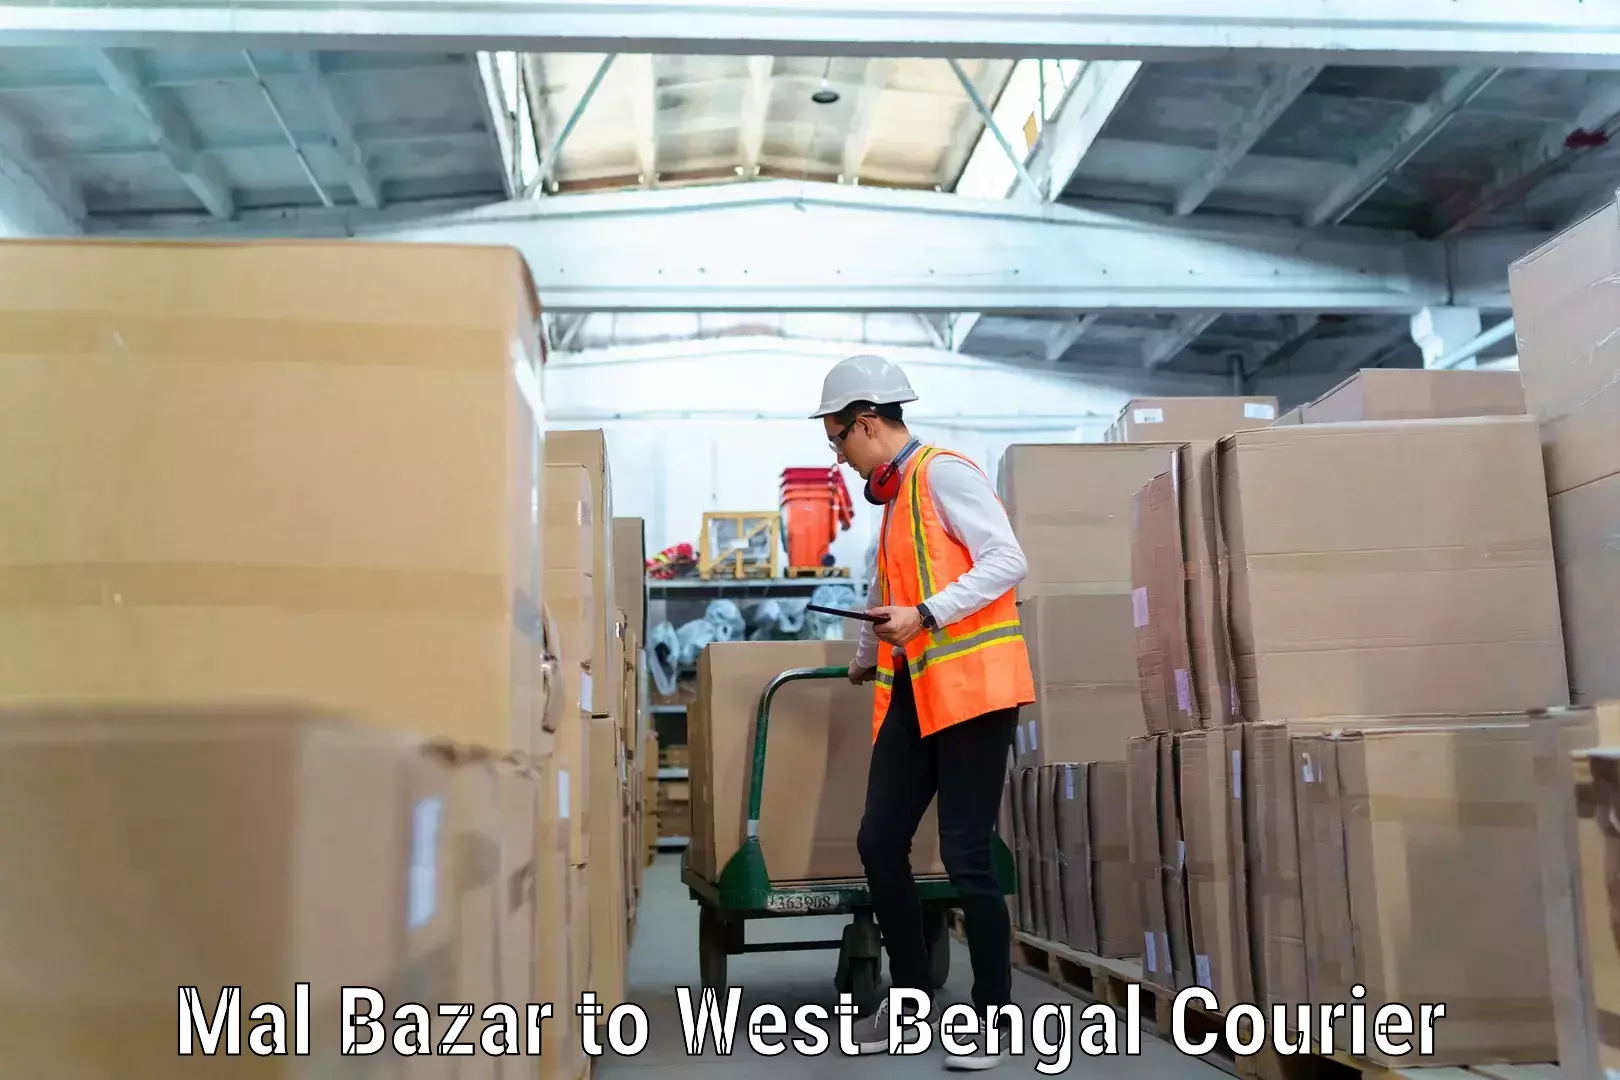 Furniture relocation experts Mal Bazar to West Bengal